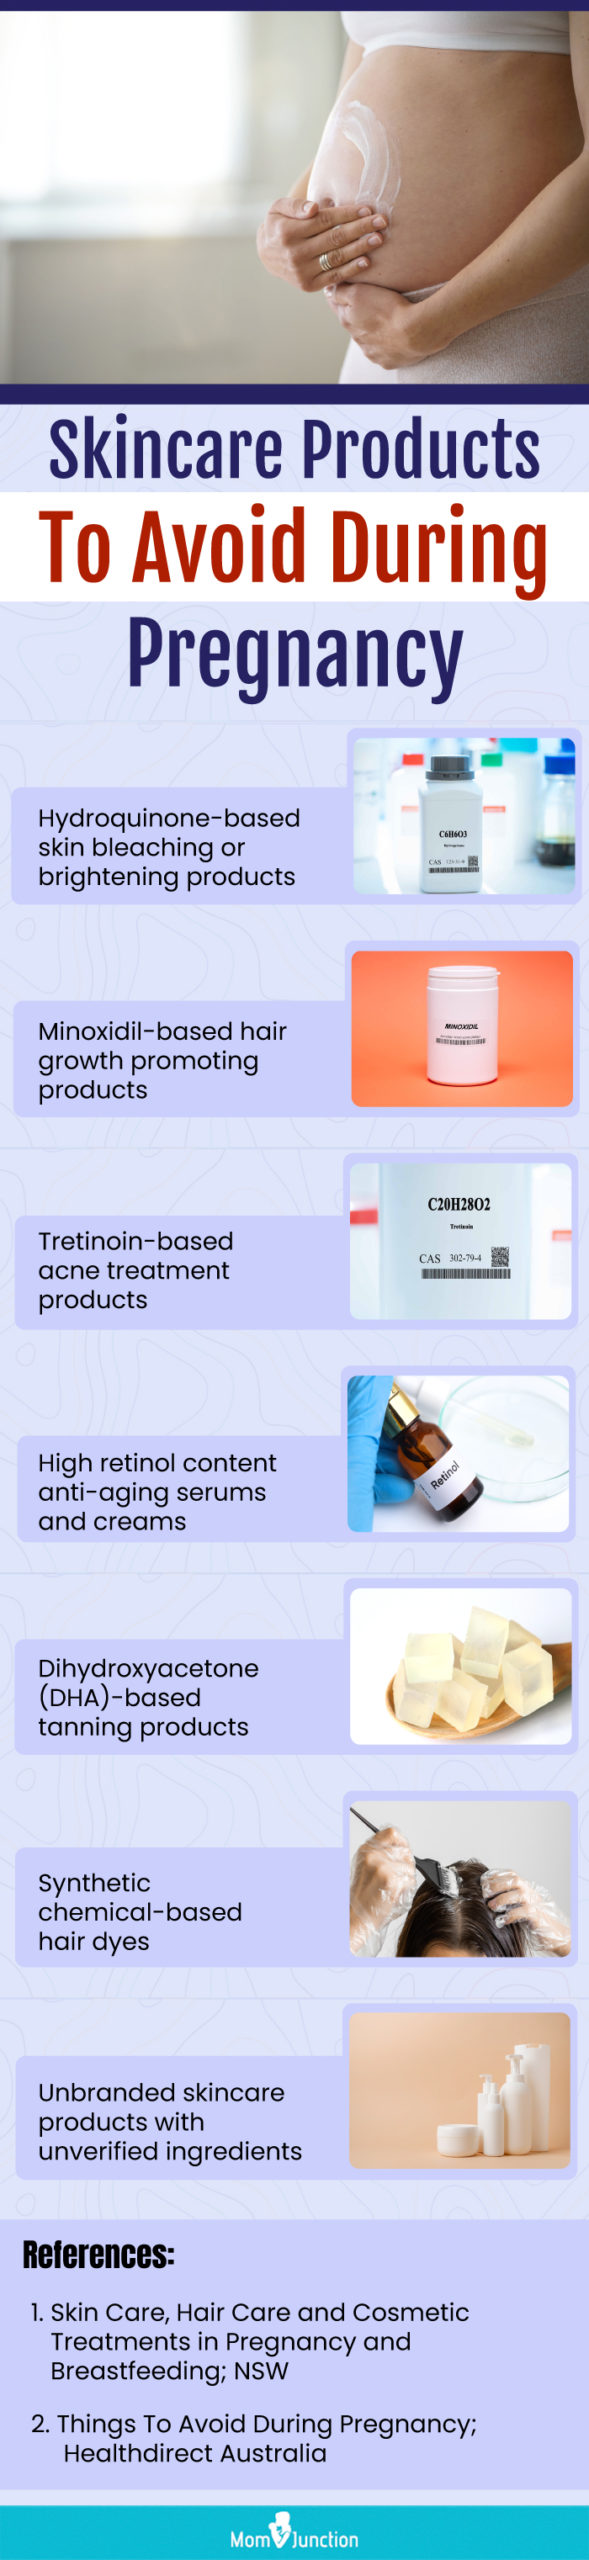 Skincare Products To Avoid During Pregnancy newest (infographic)